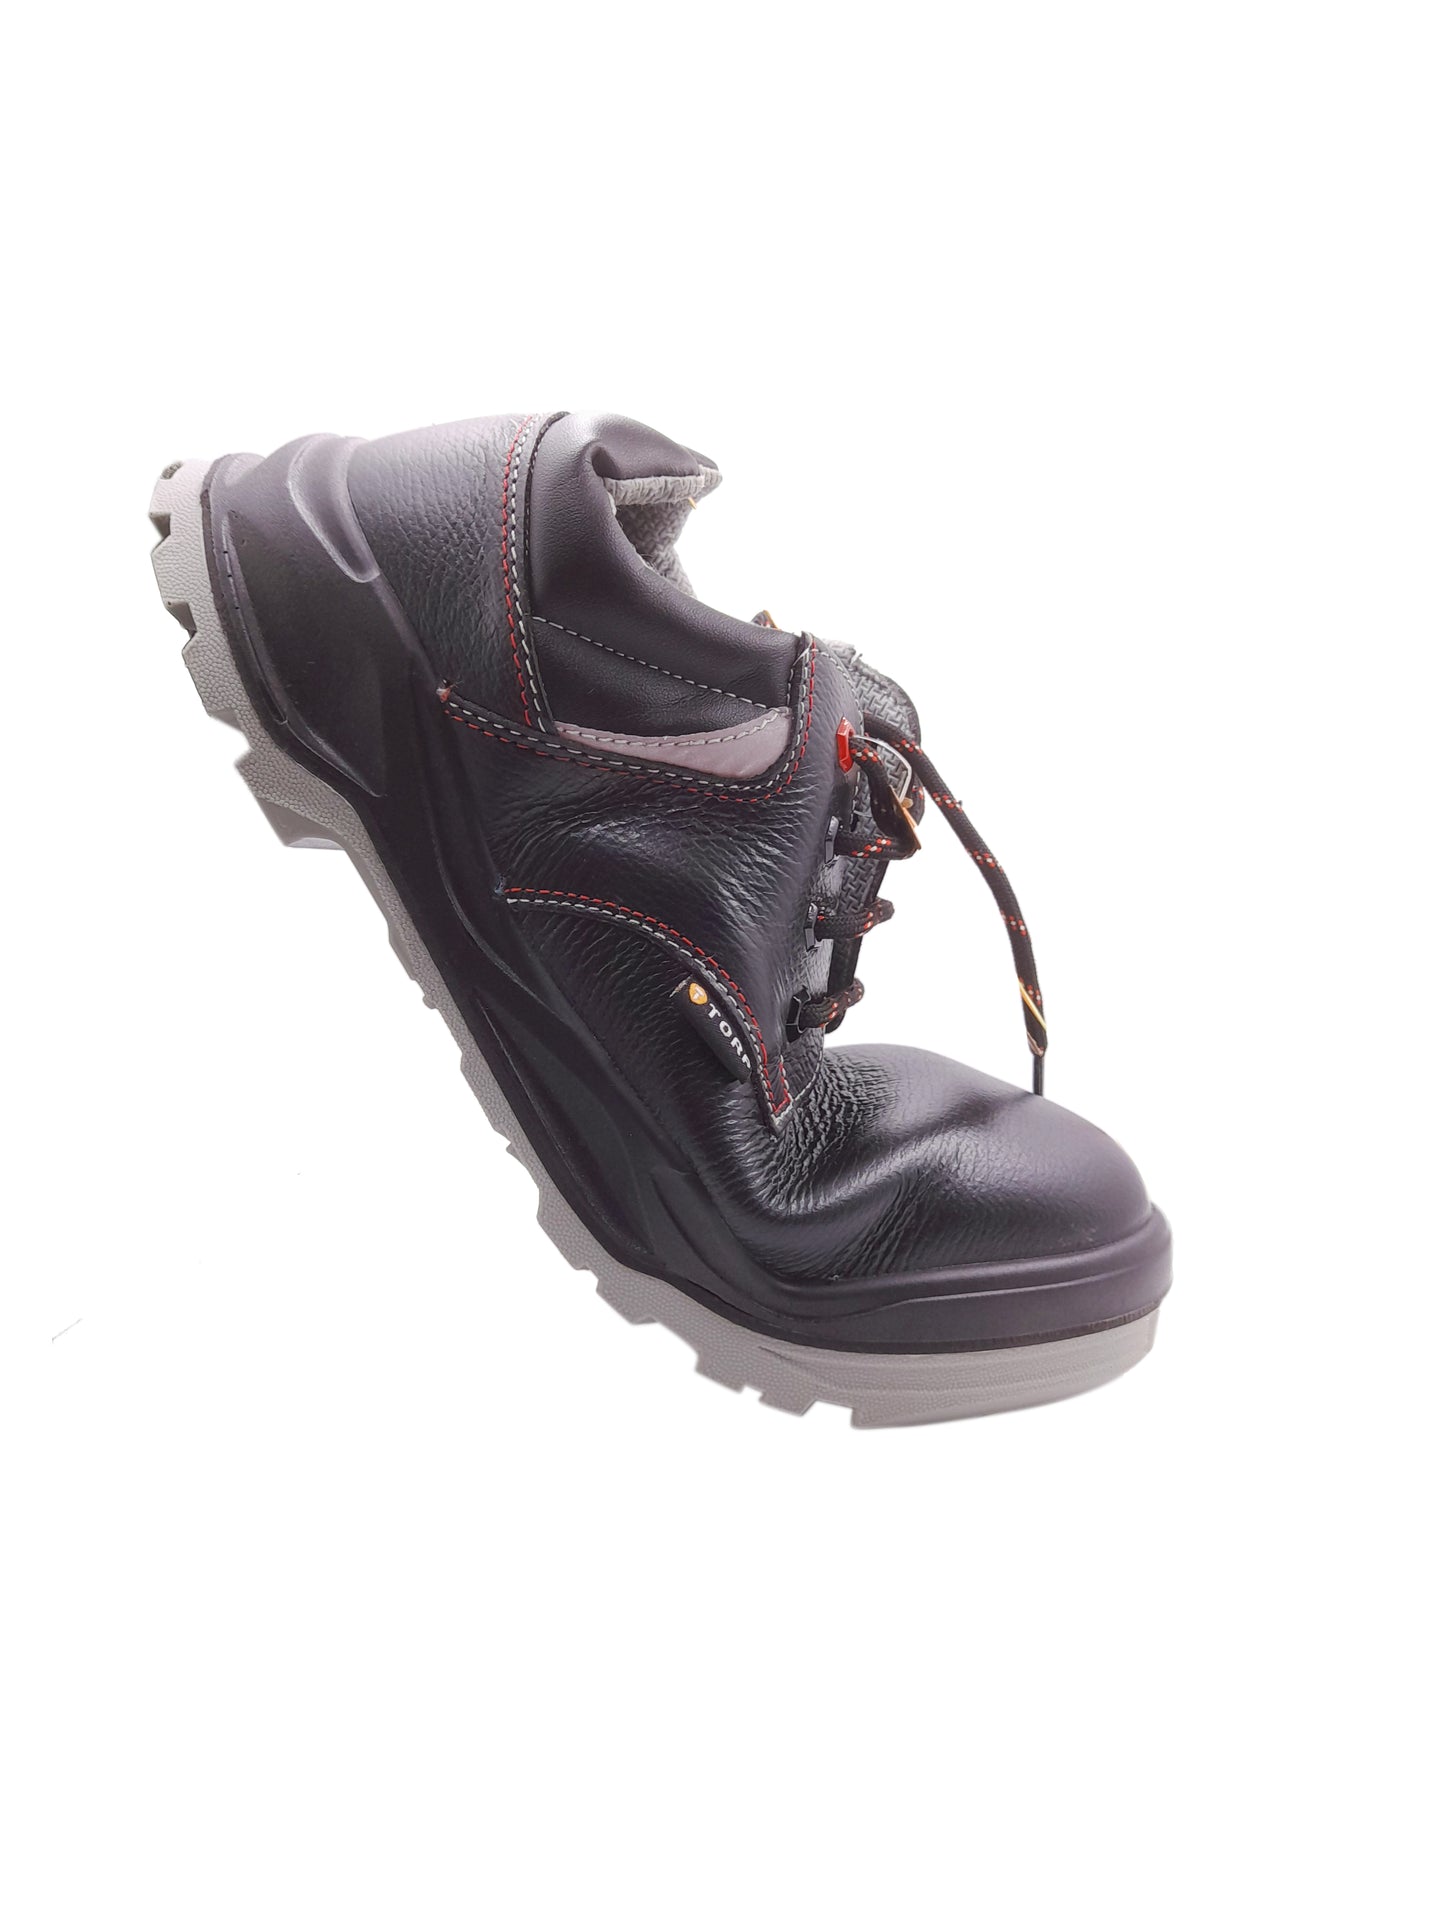 T Torp Ben 08 leather safety shoes